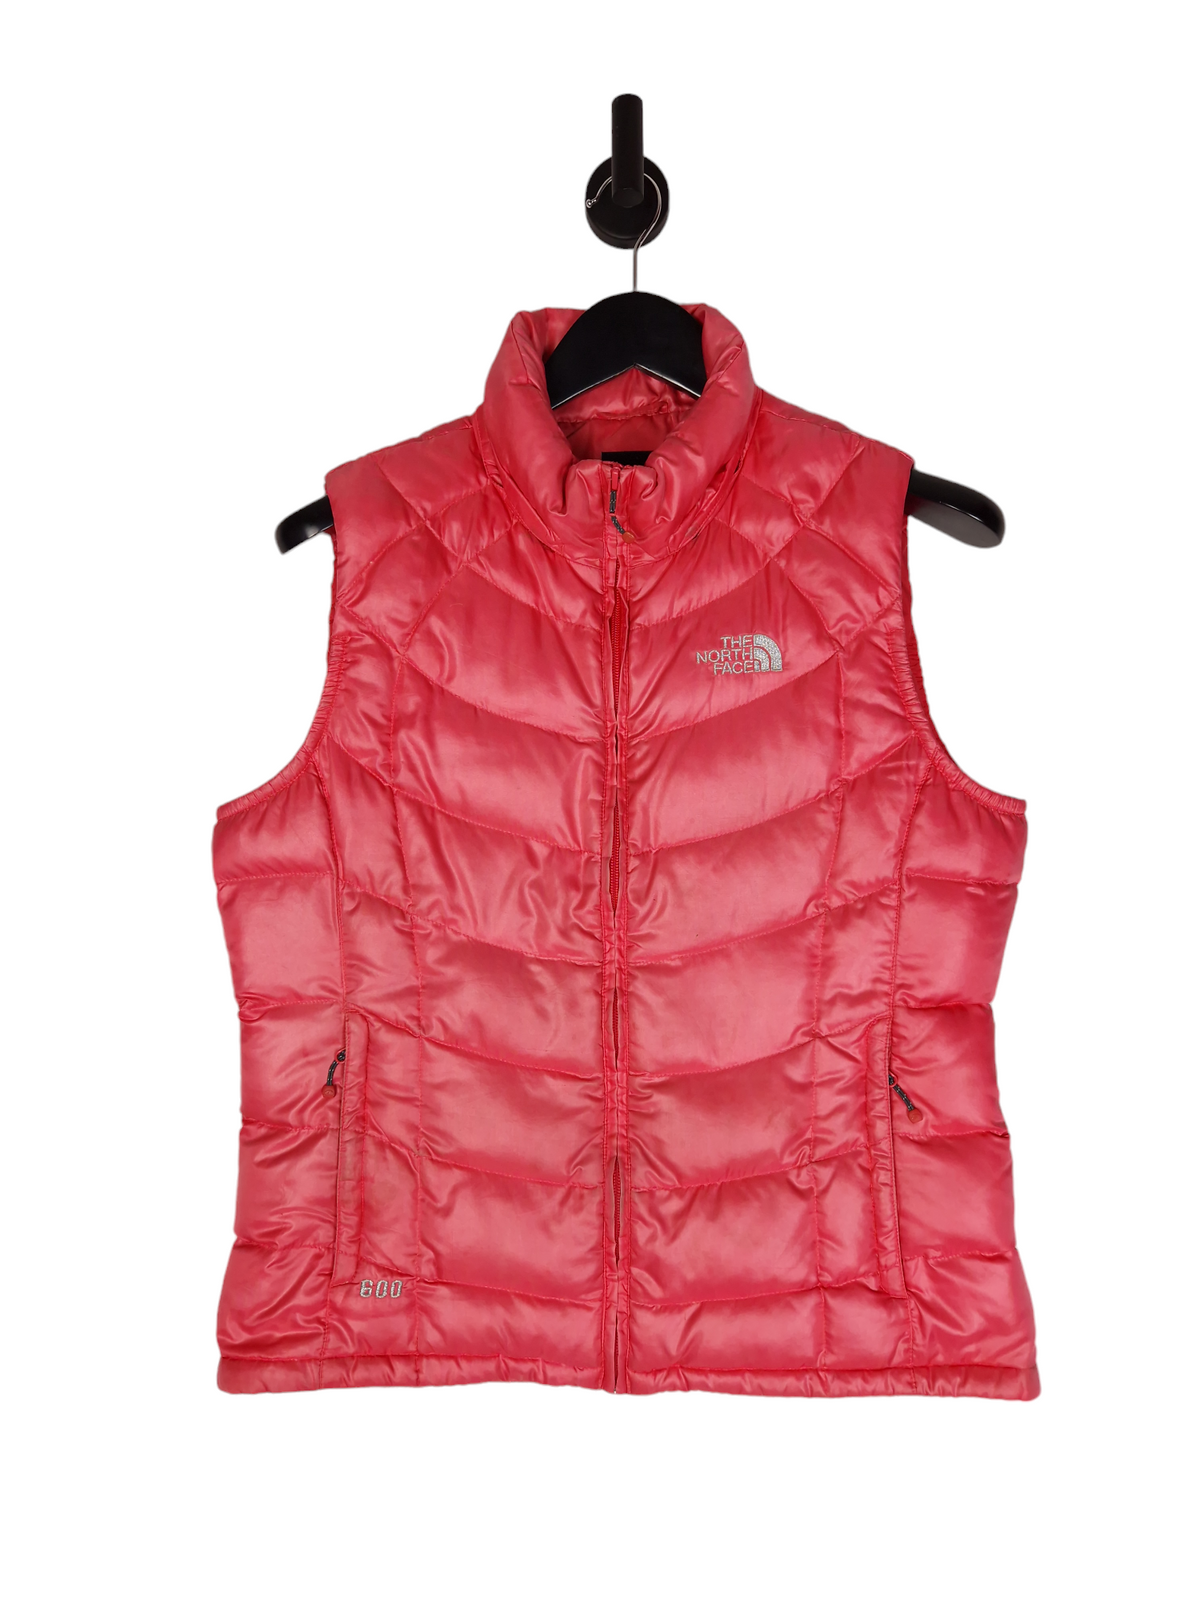 The North Face 600 Gilet Puffer Jacket - Size  UK 12